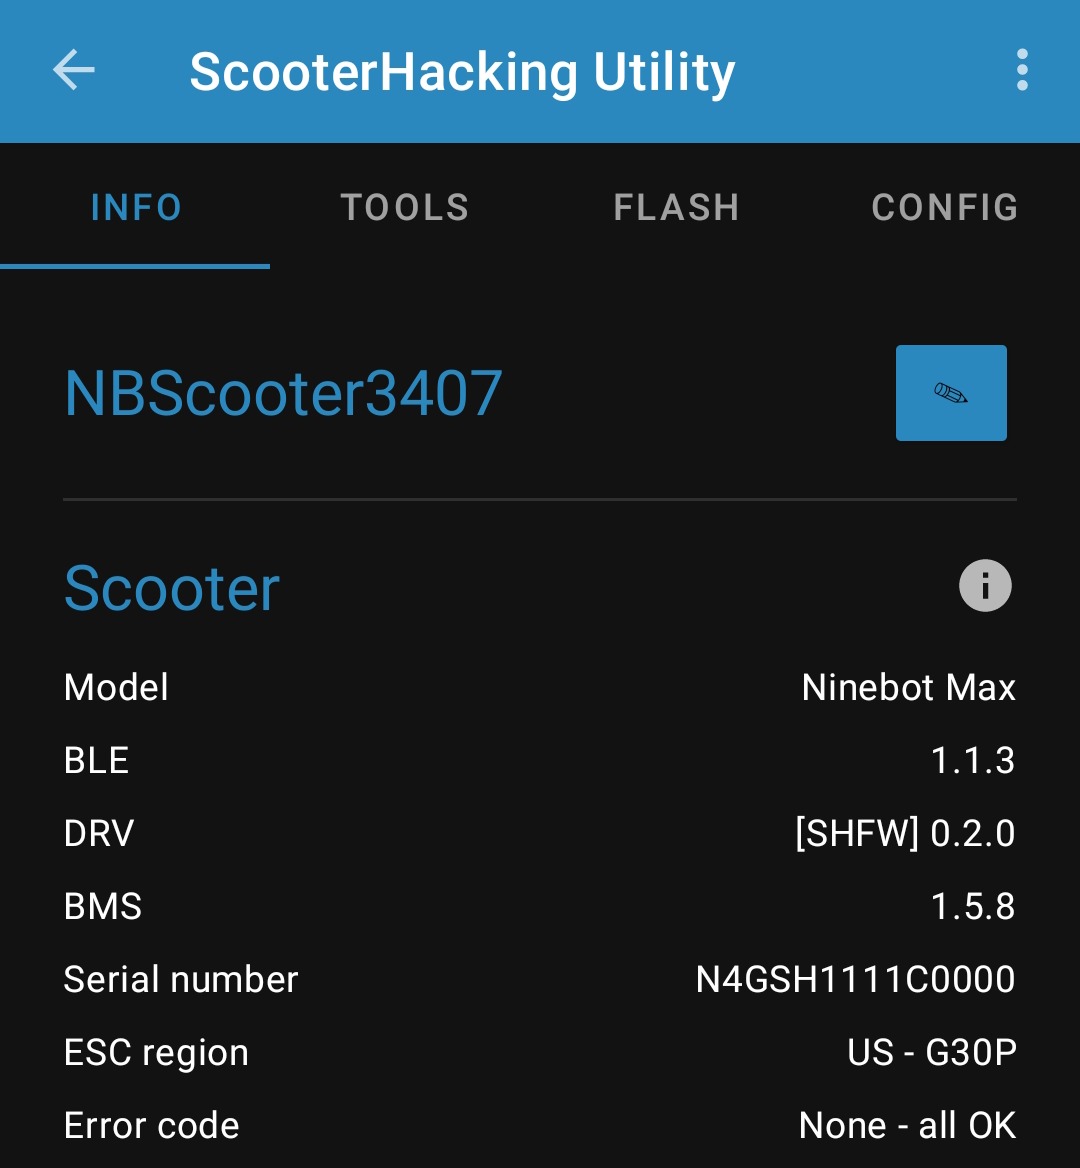 ScooterHacking Utility by ScooterHacking.org